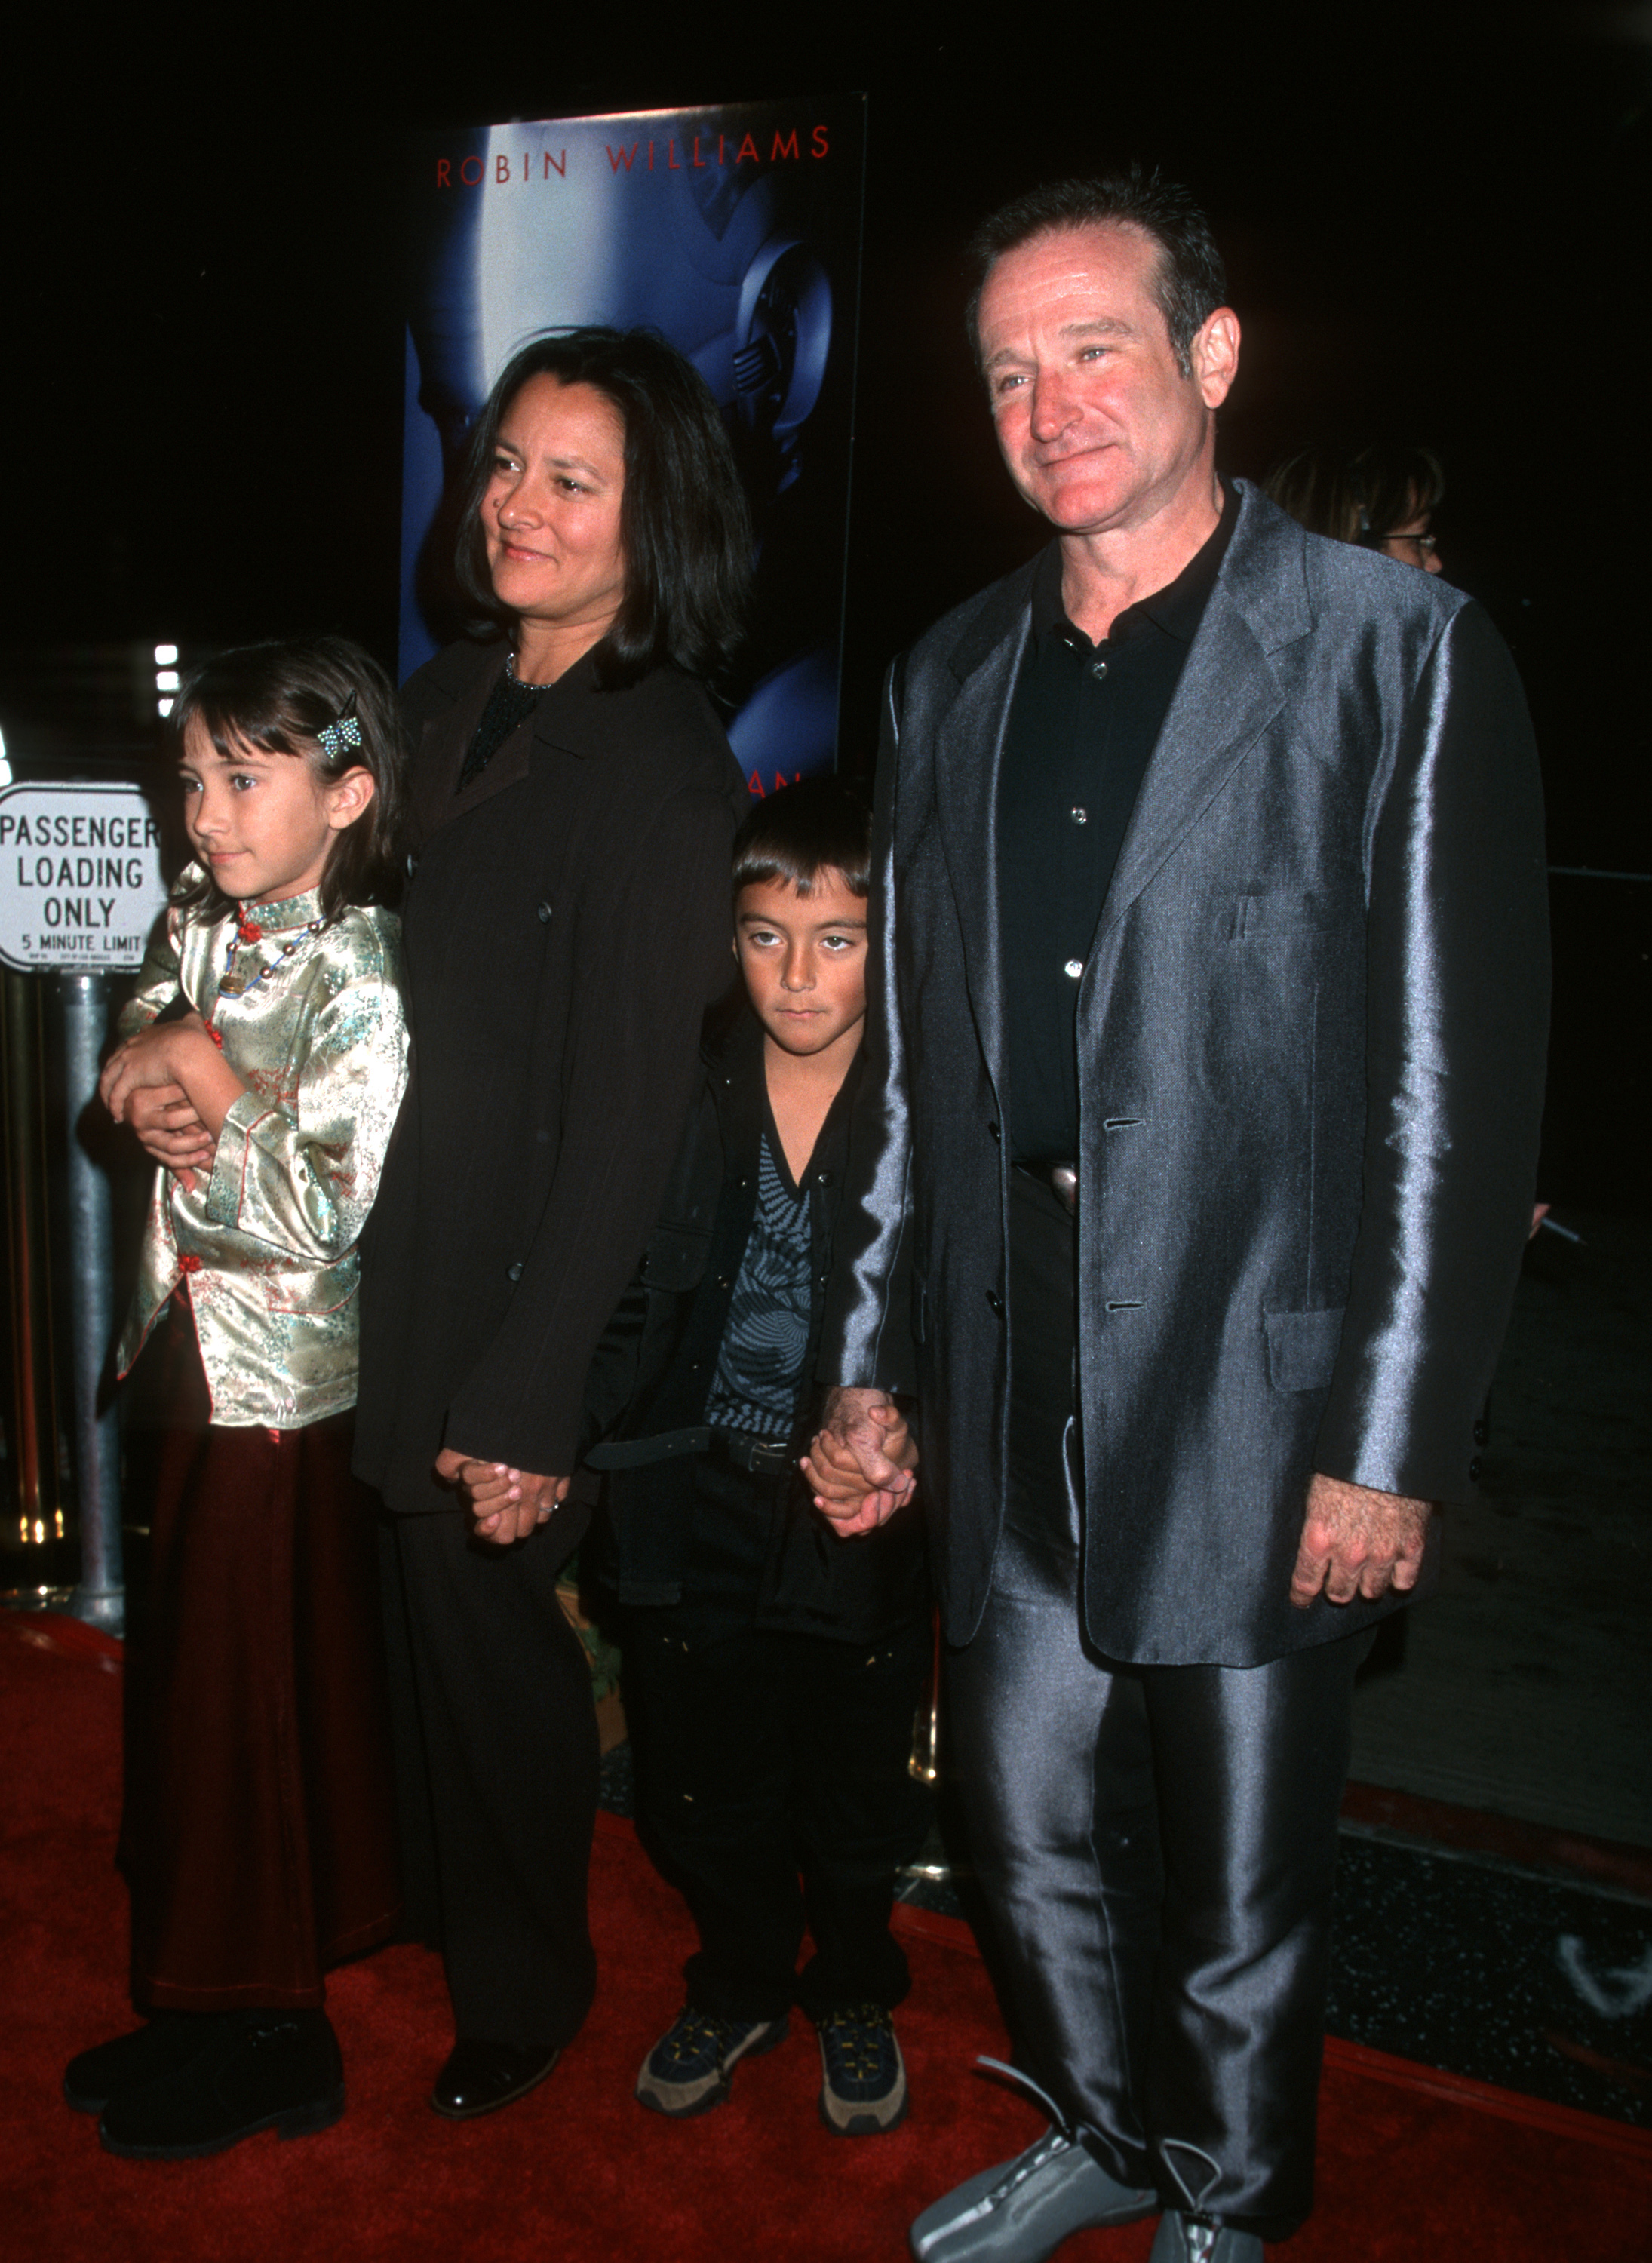 Marsha Garces, Robin, Zelda, and Cody Williams at the premiere of "Bicentennial Man" on December 13, 1999 | Source: Getty Images